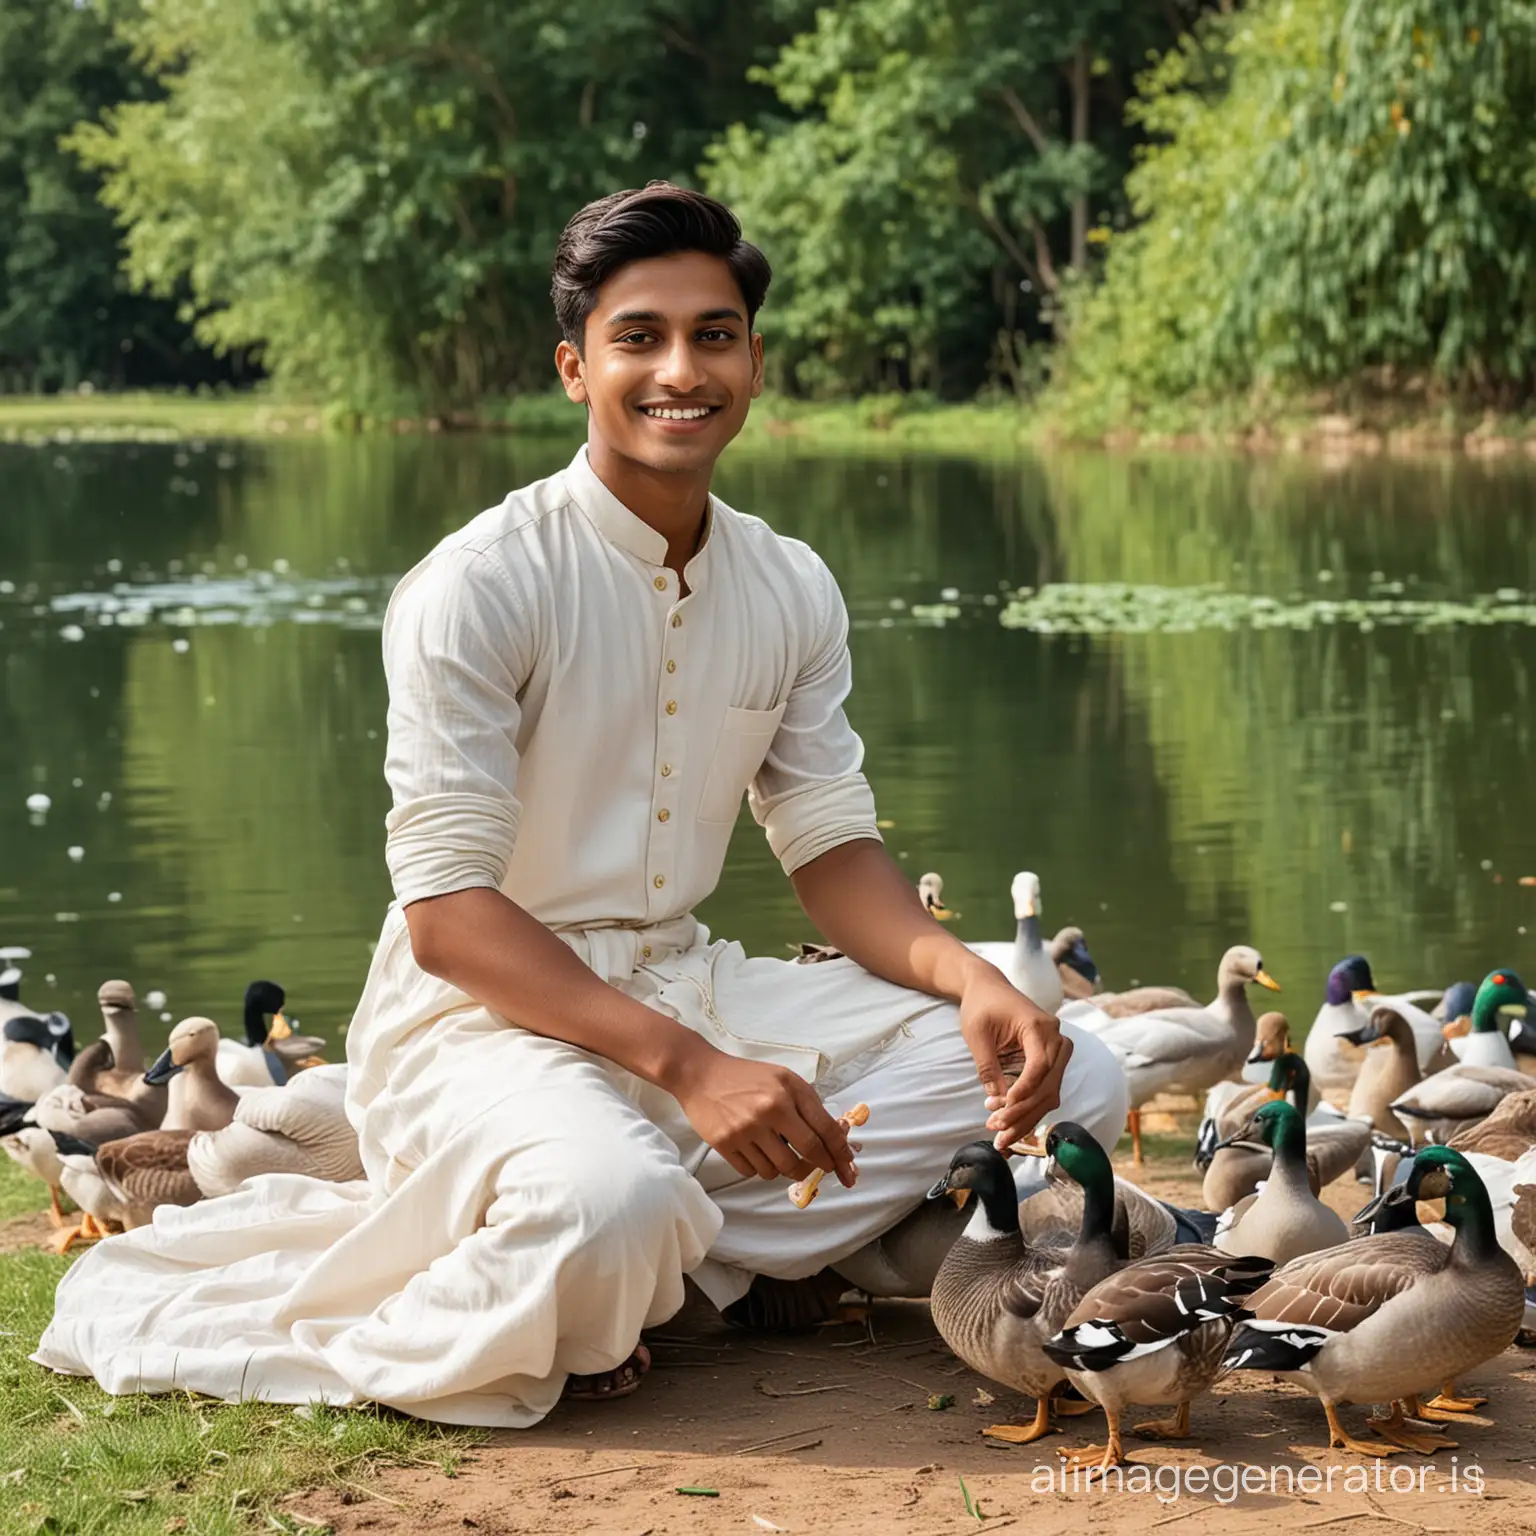 Young-Indian-Man-Feeding-Ducks-by-the-Serene-Lake-Greeting-a-Smiling-Woman-in-White